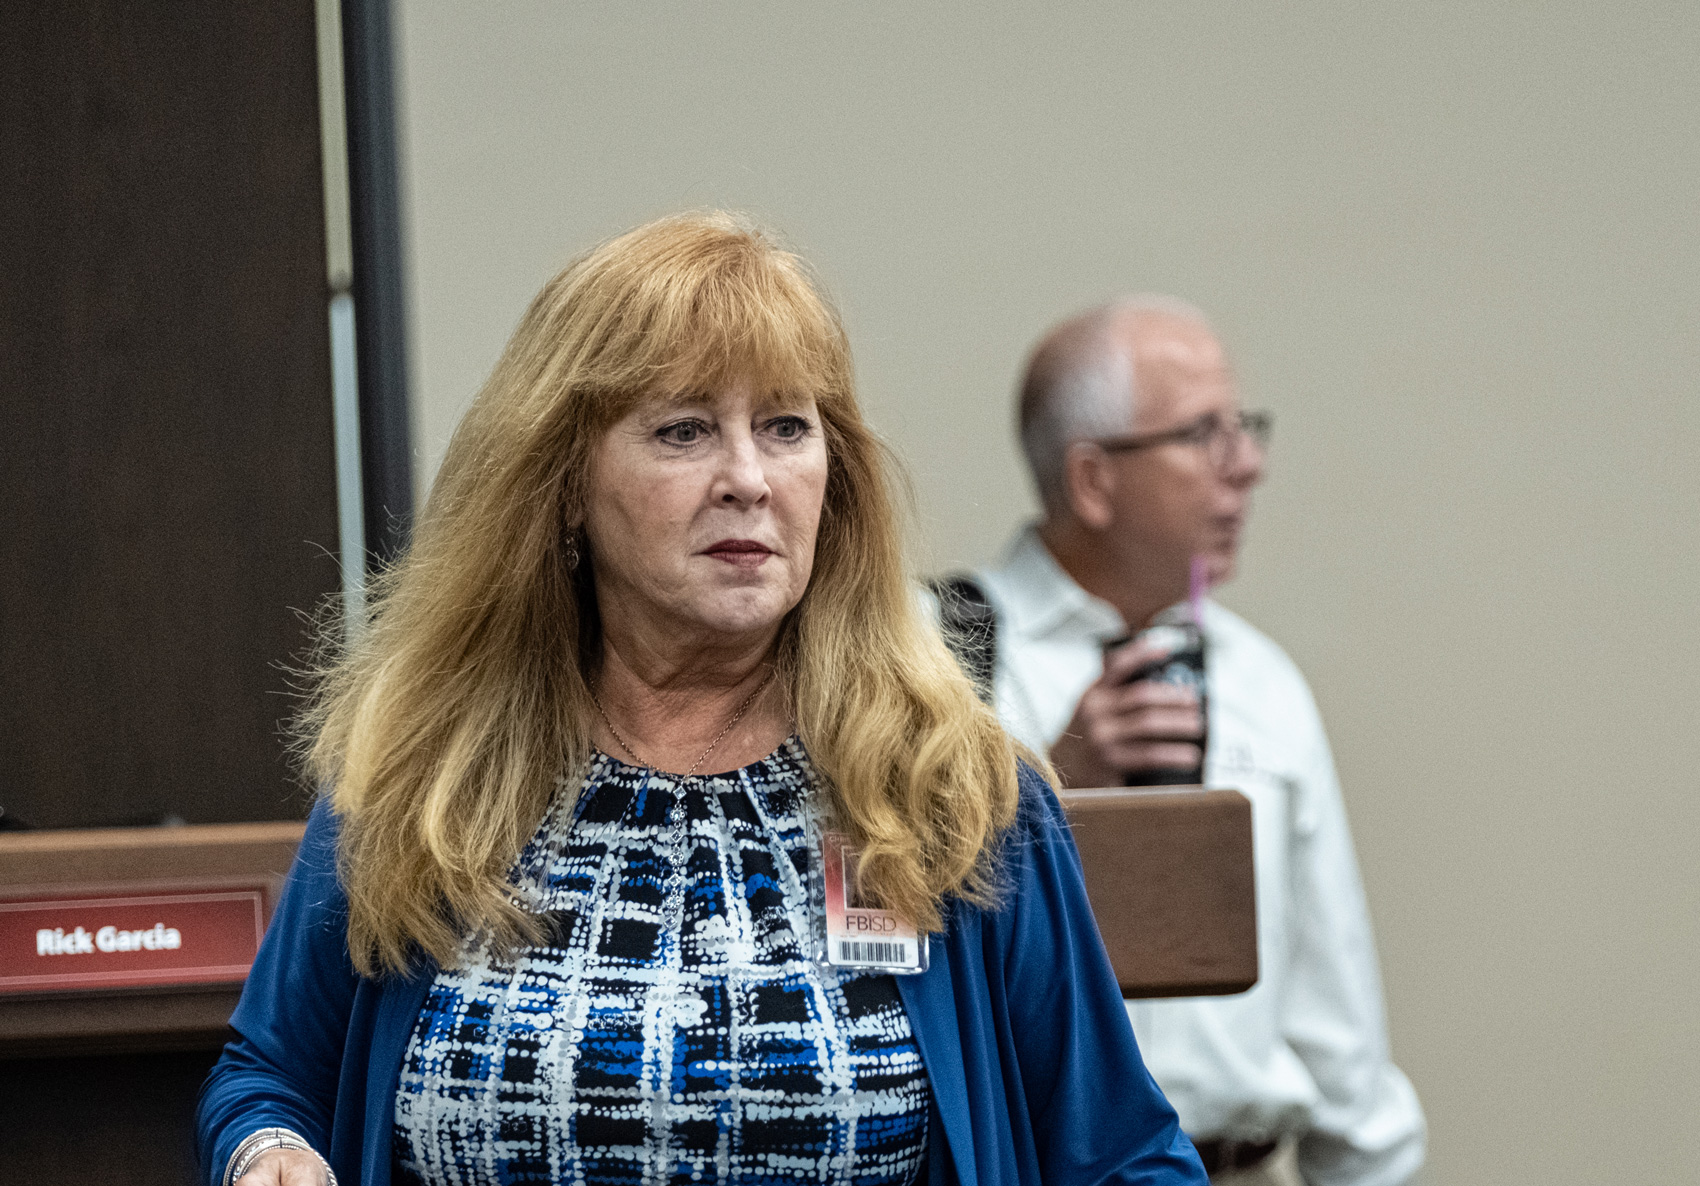 Fort Bend ISD Superintendent Christie Whitbeck makes her way through a board meeting Thursday at the district's headquarters in Sugar Land.